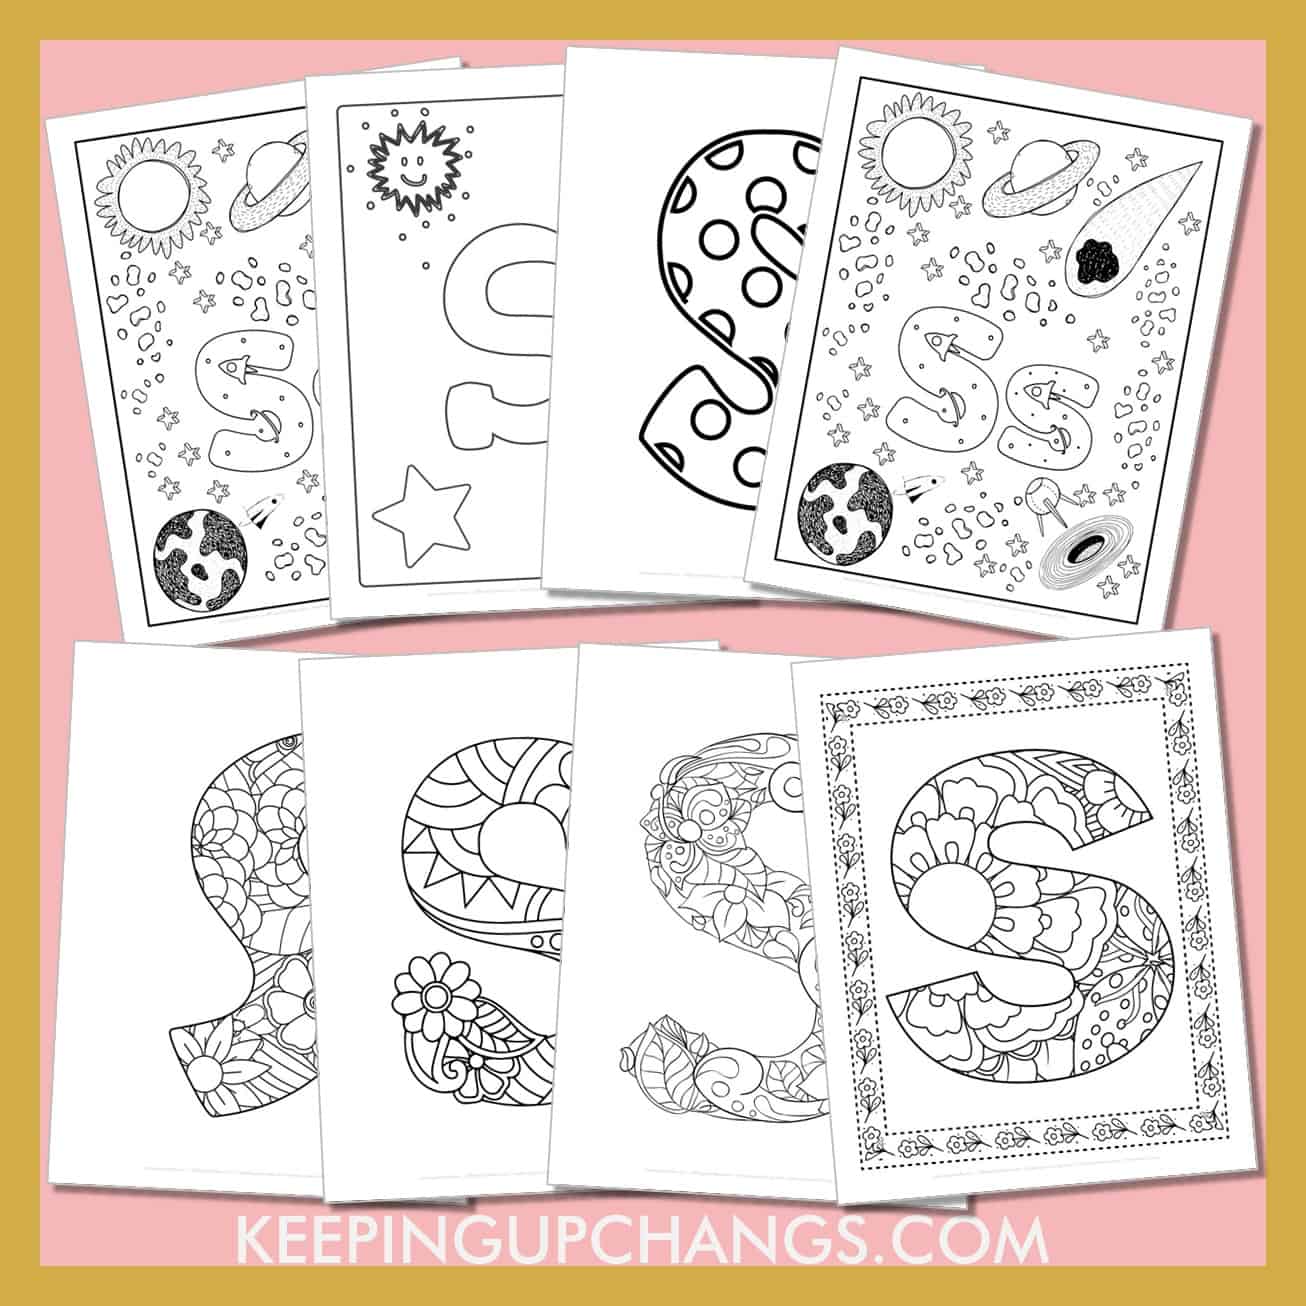 free alphabet letter s to color for toddlers, preschool, kindergarten, to adults.